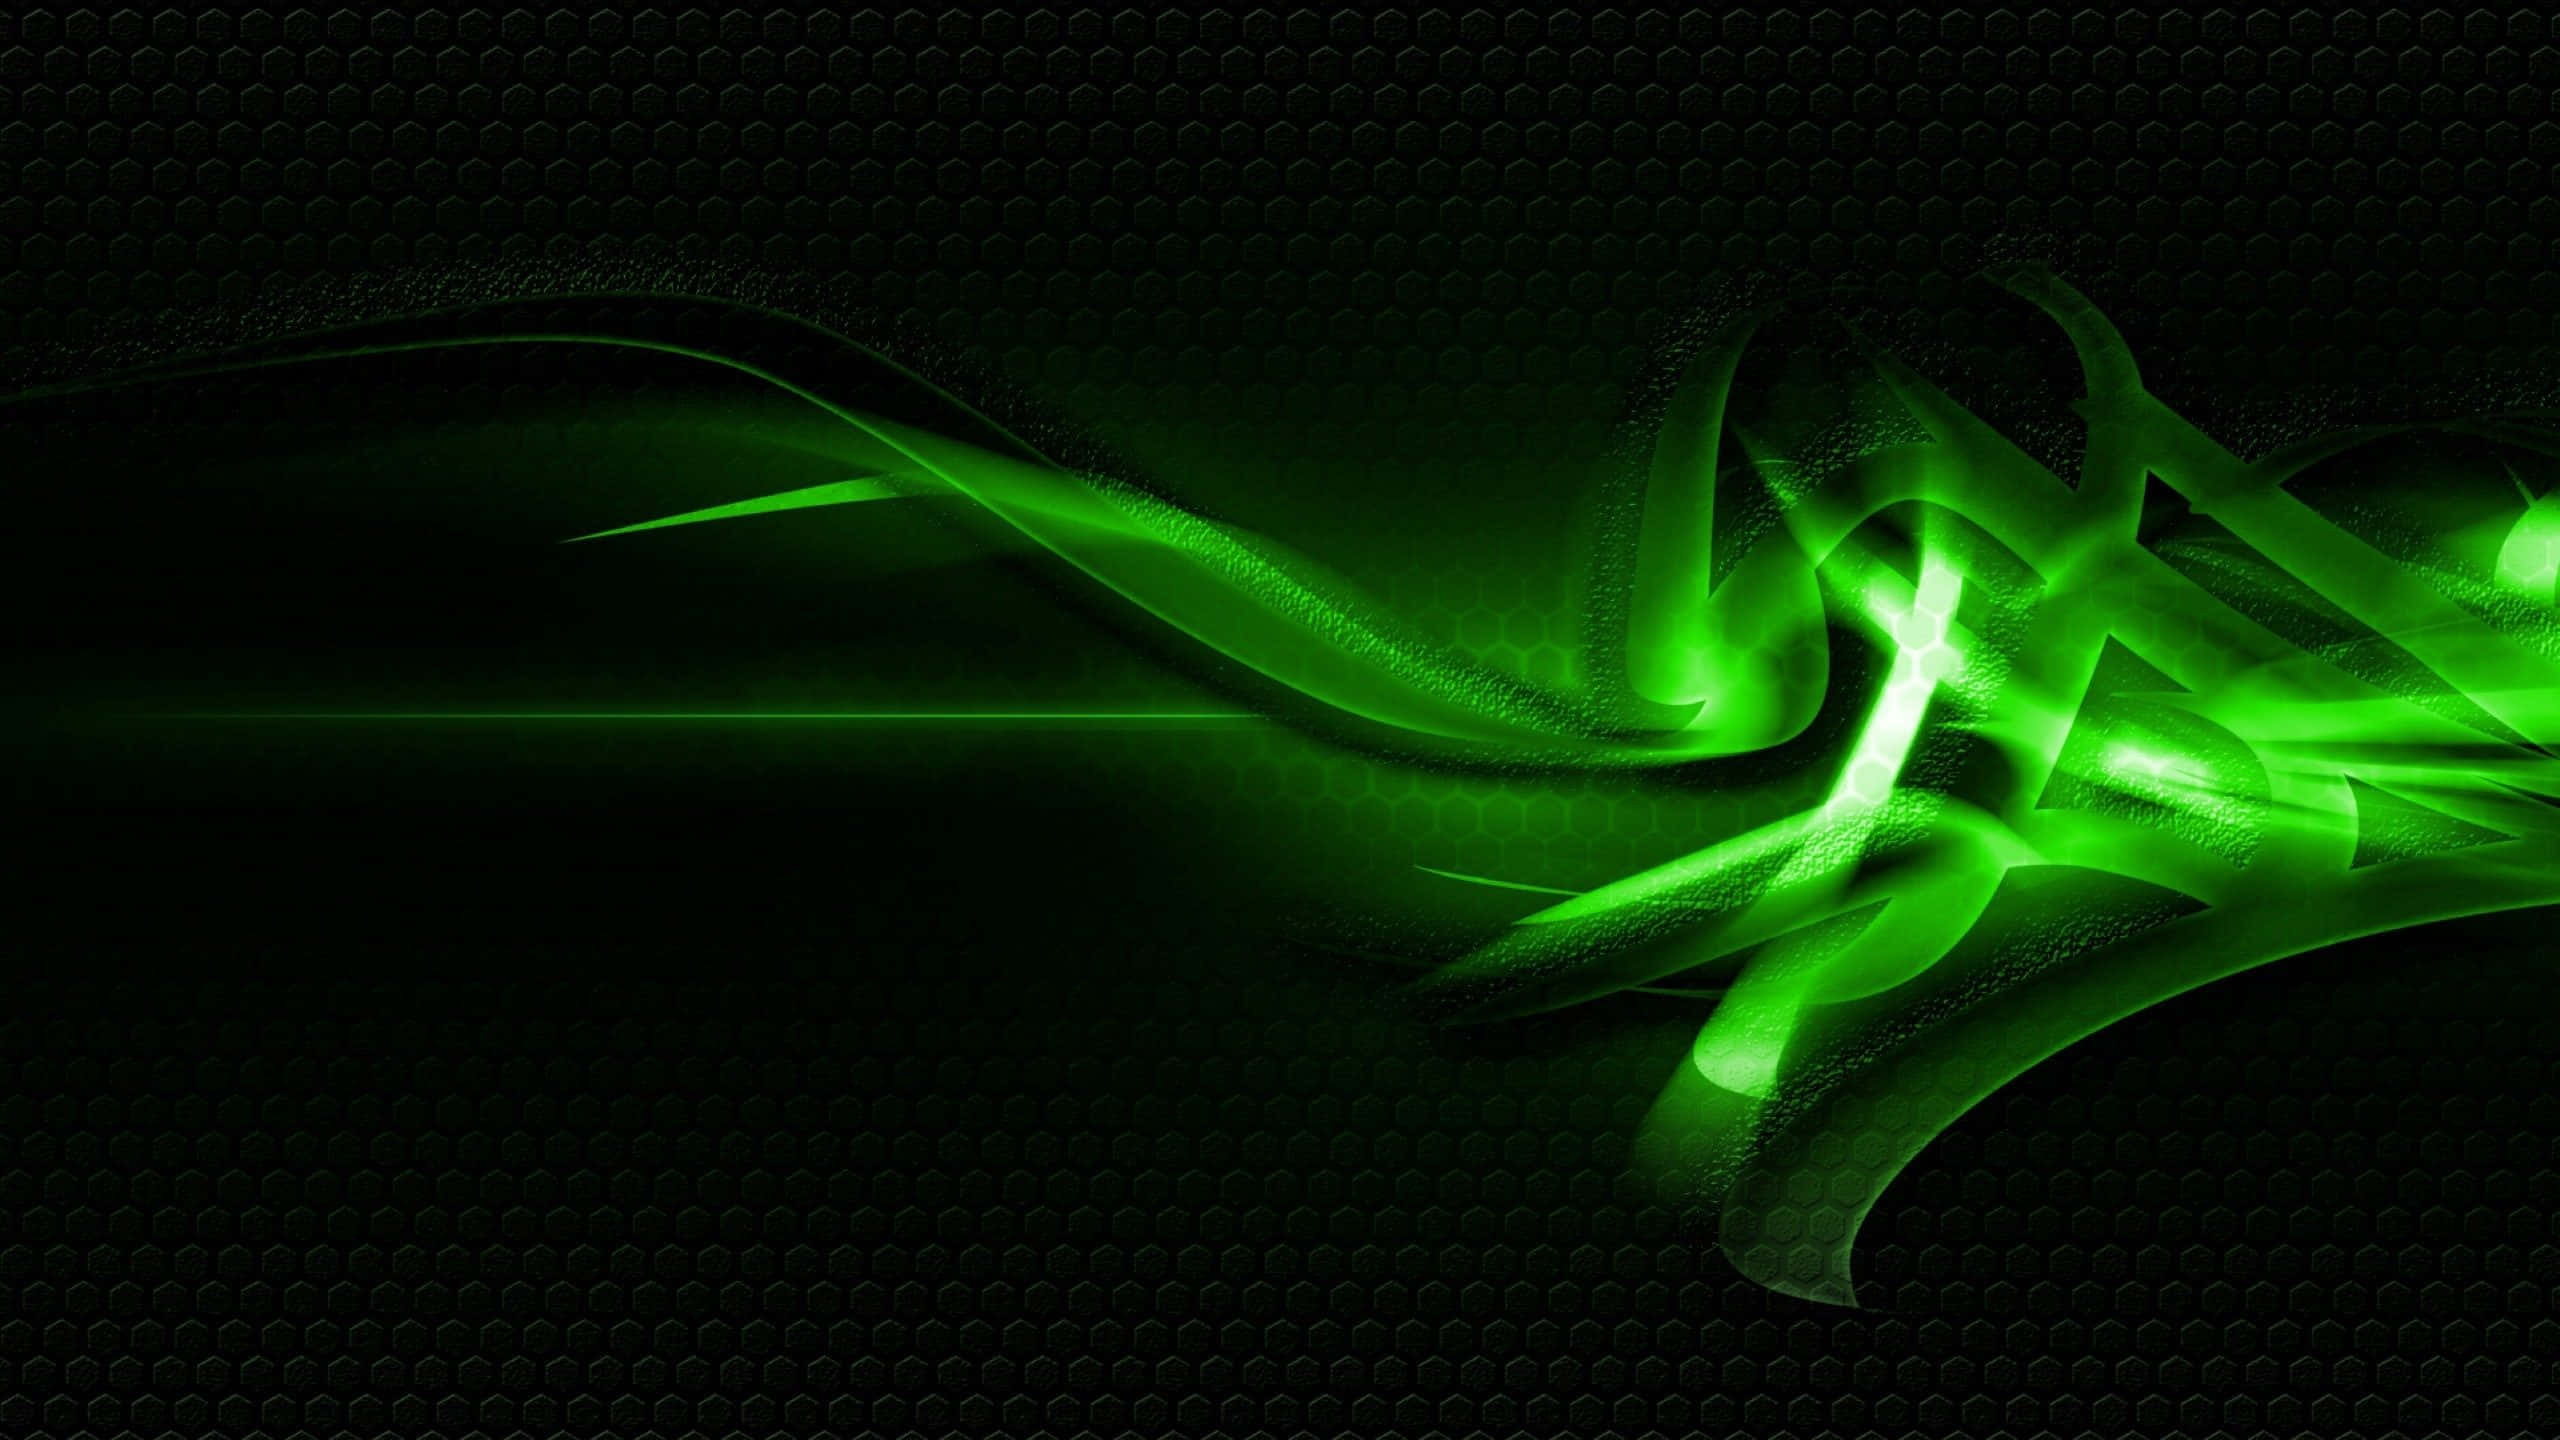 300+] Neon Green Backgrounds